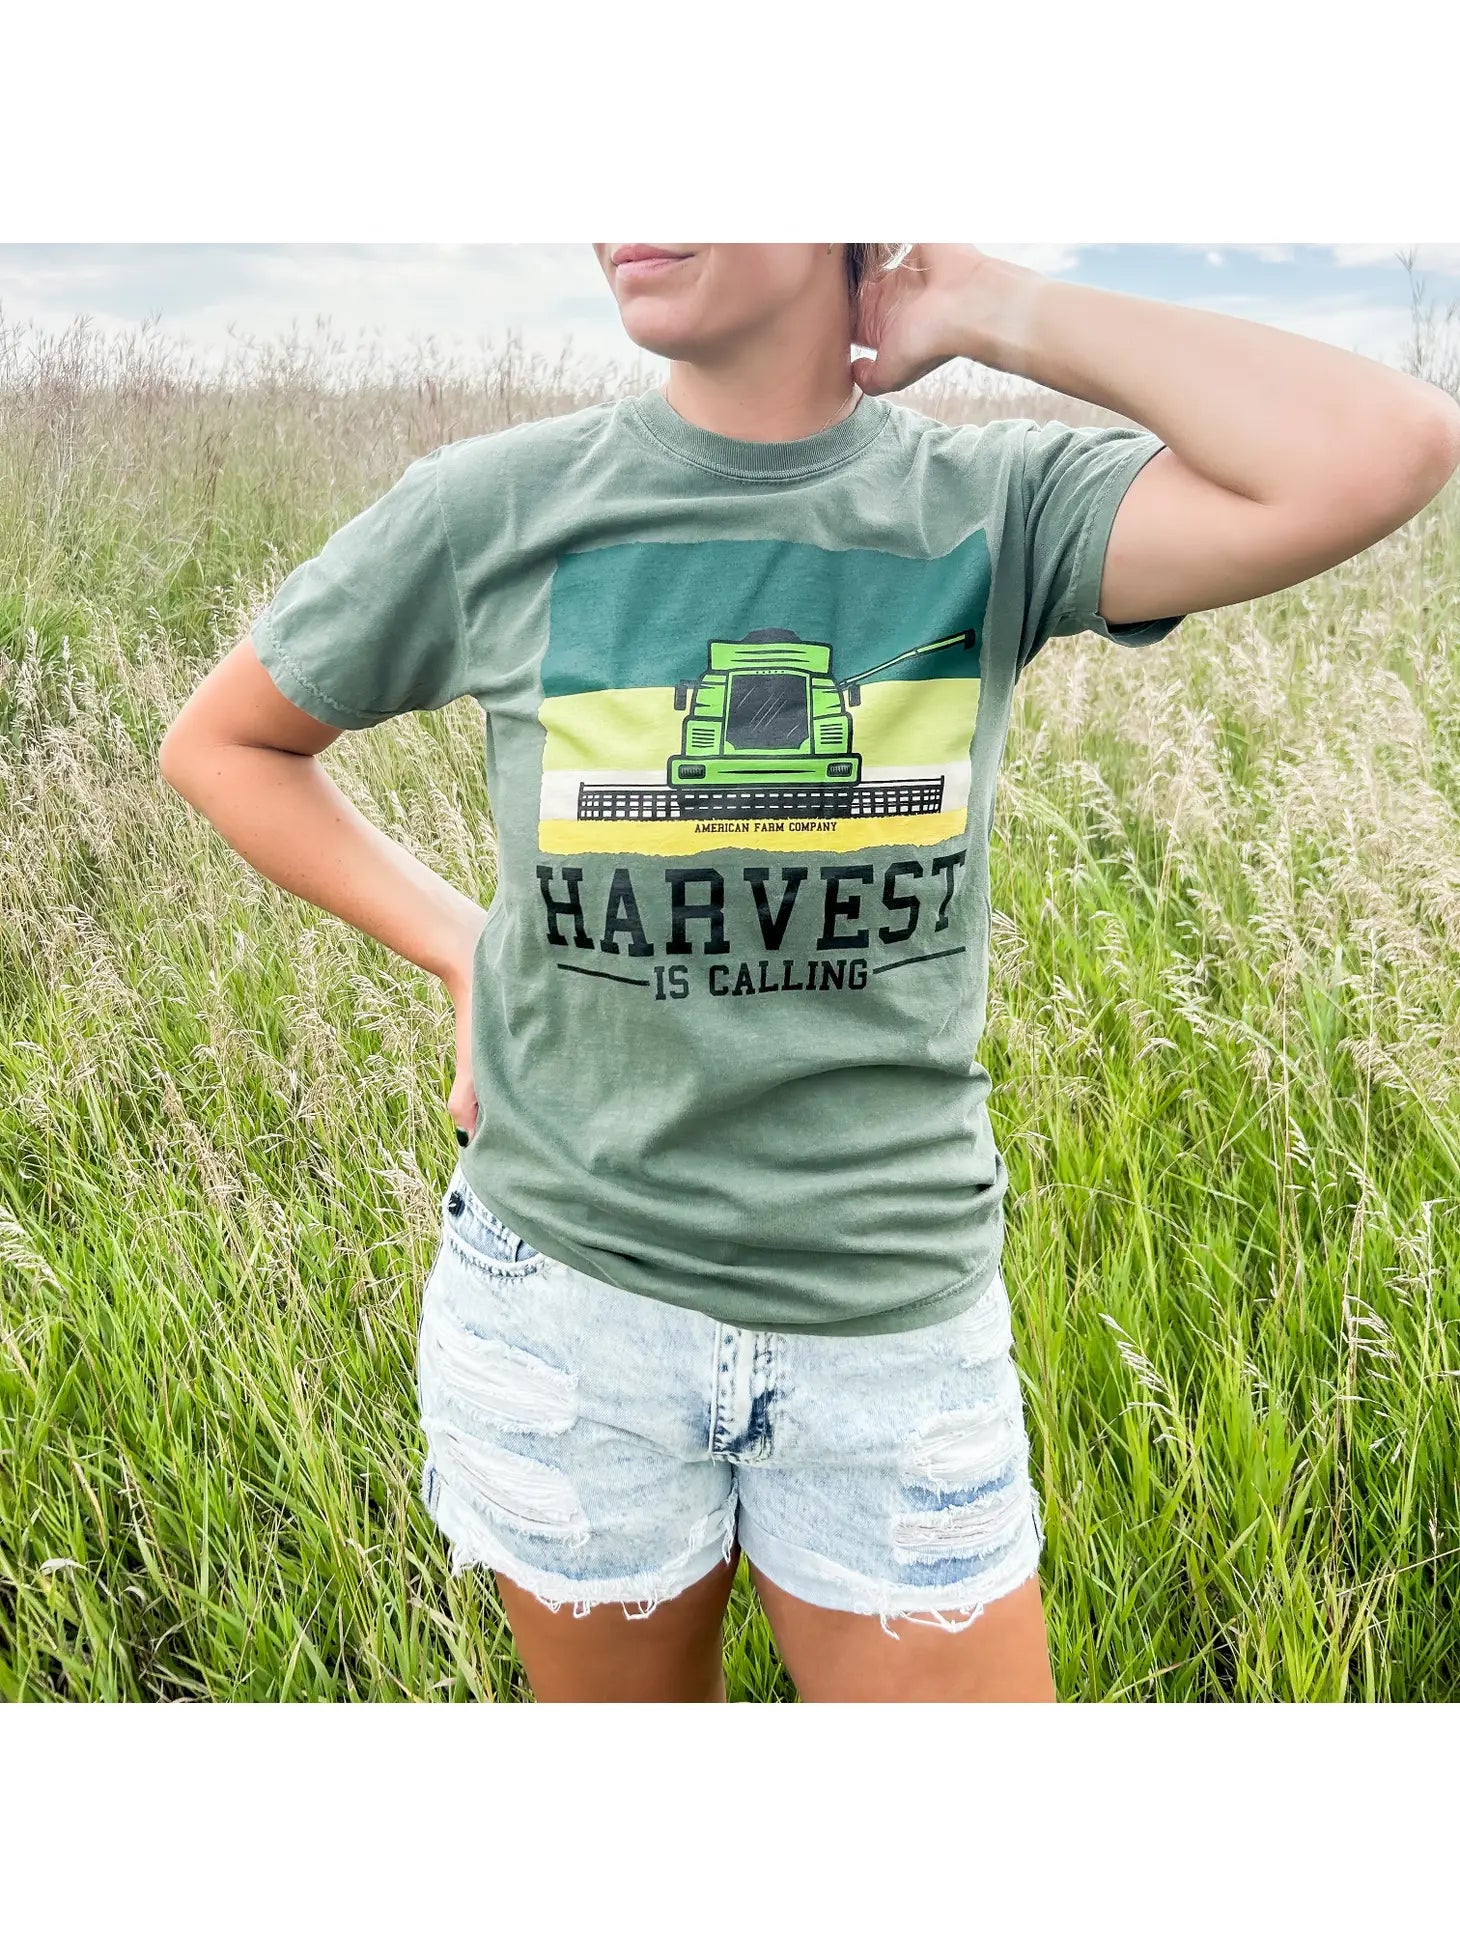 Harvest is Calling